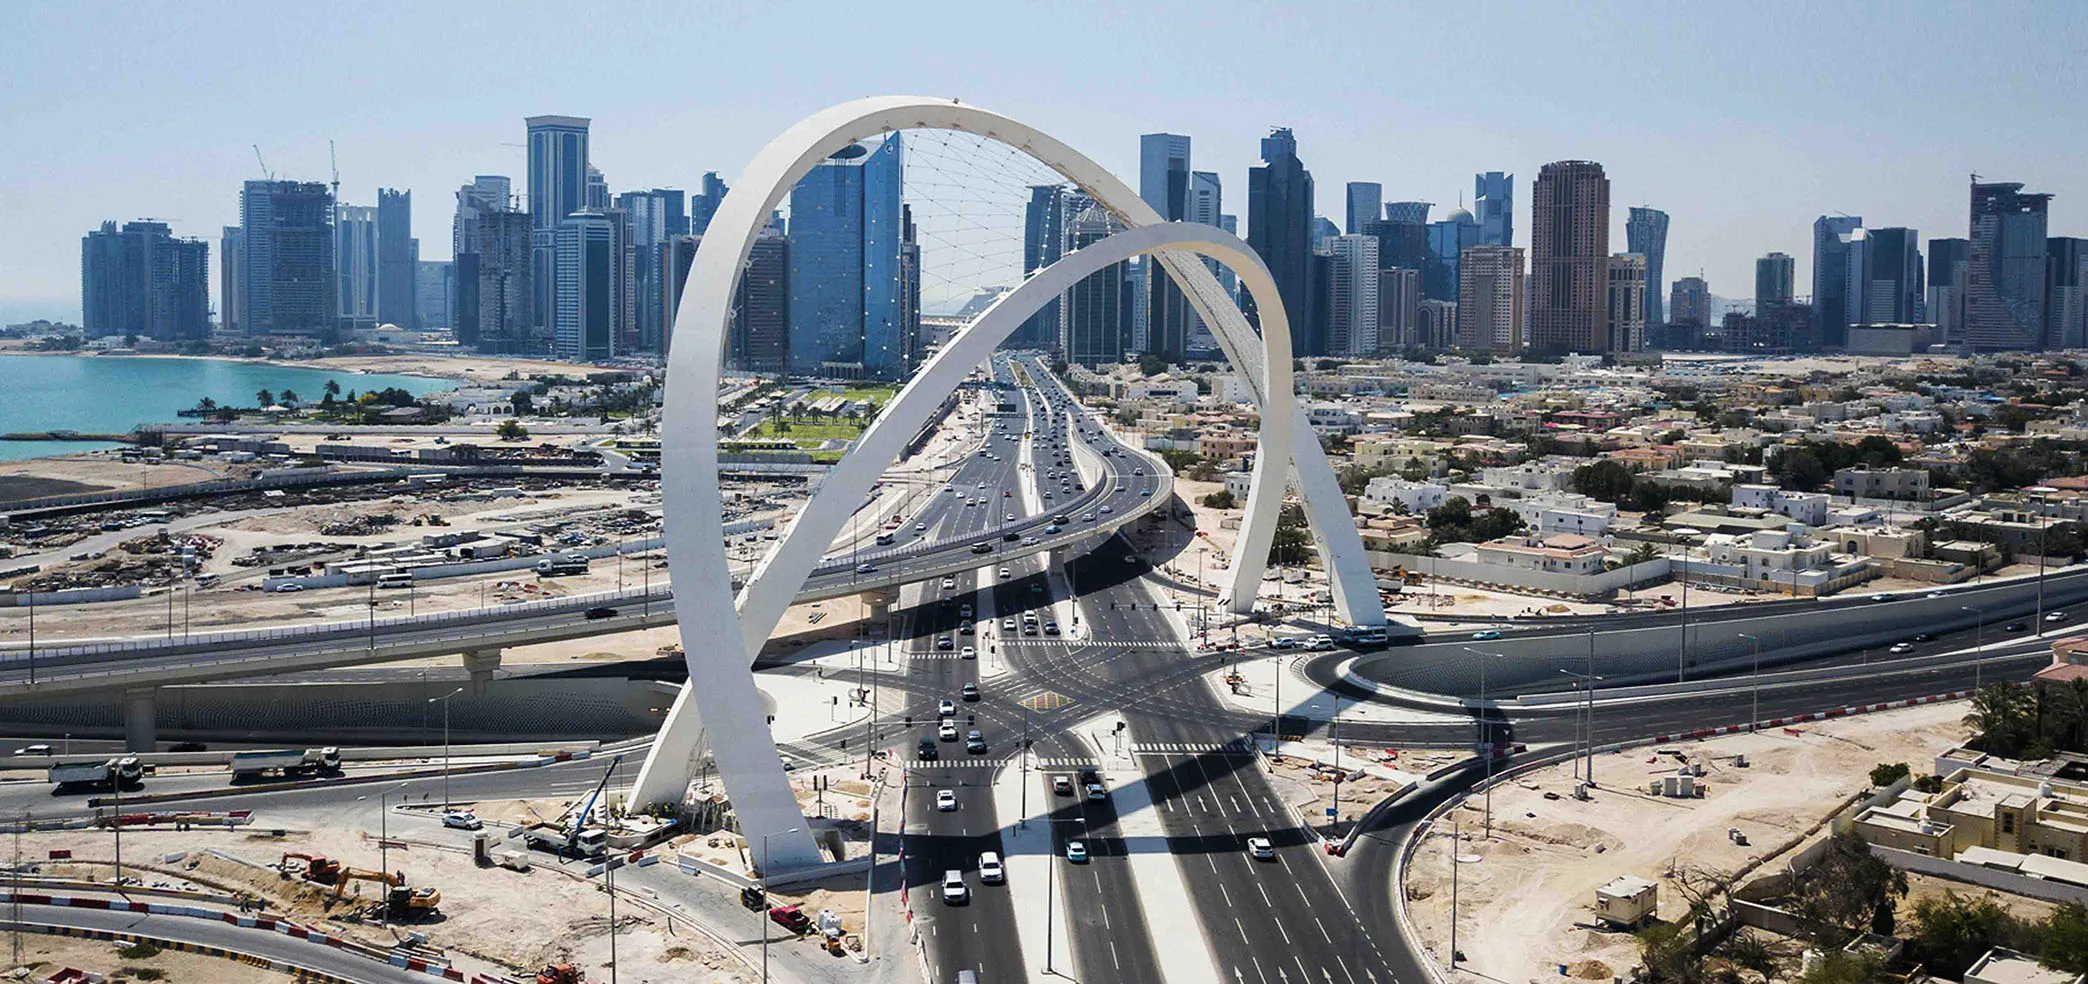 Al Wahda Arches, Qatar. Maffeis Engineering's adoption of Resilio Platform has transformed their ability to share and collaborate across sites in real-time—on mission-critical projects.